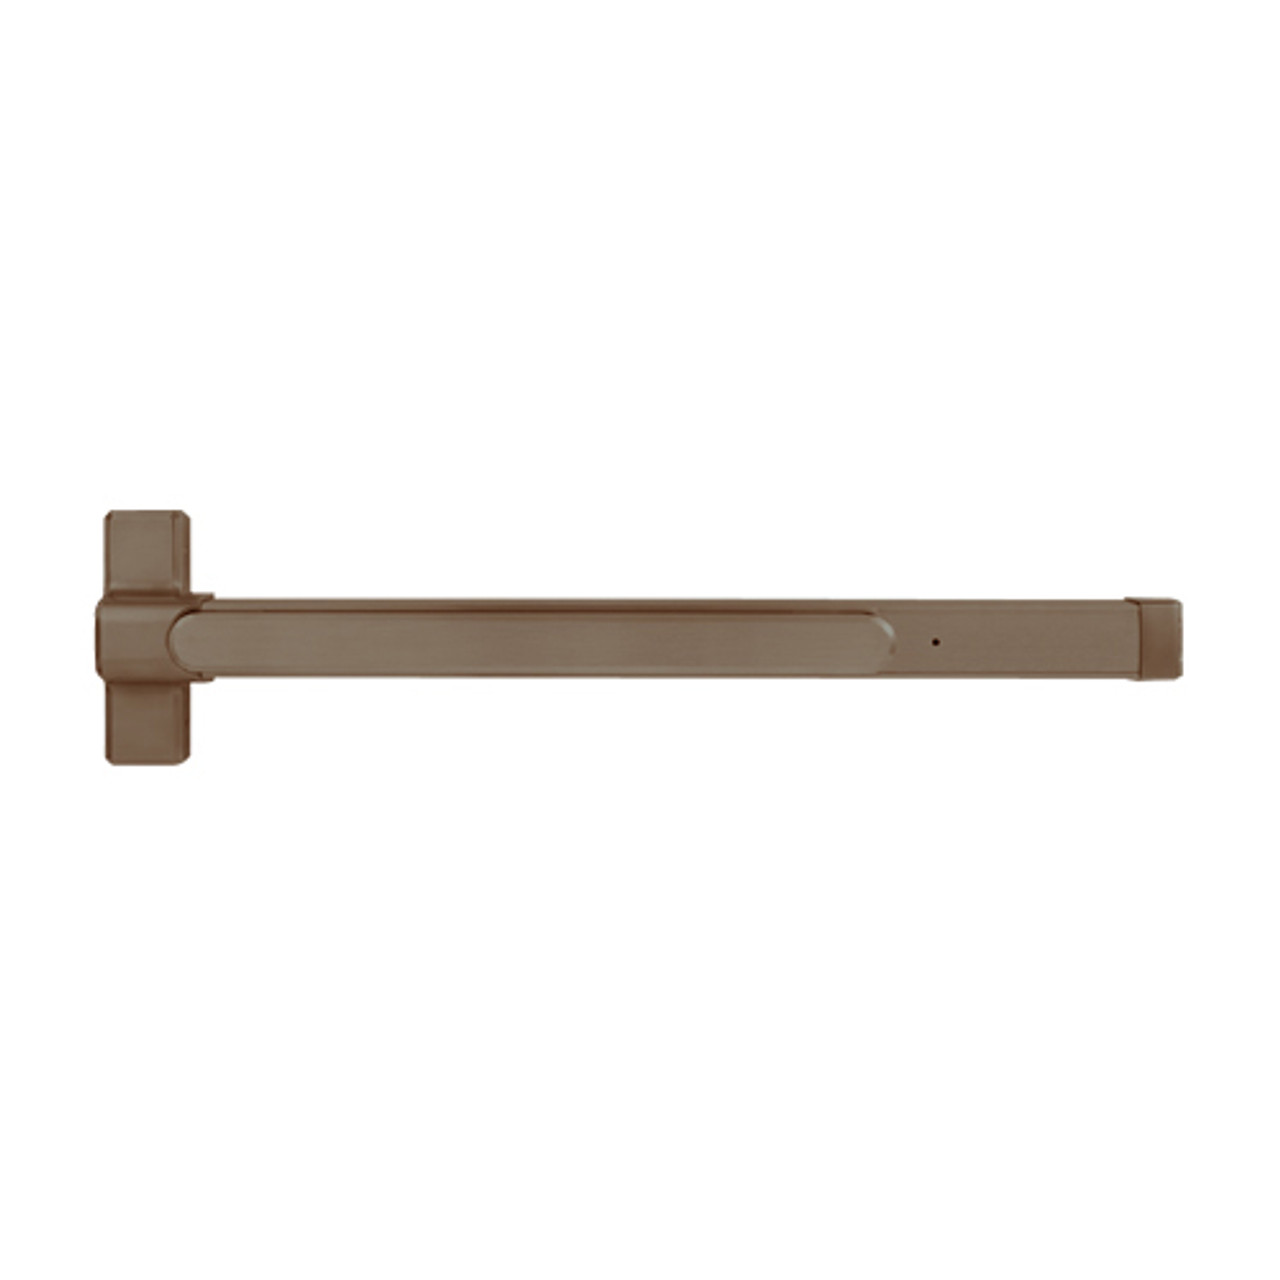 QED127ED-36-7-313AN Stanley QED100 Series Heavy Duty Concealed Vertical Rod Hex Dog Exit Device in Anodized Duranodic Bronze Finish